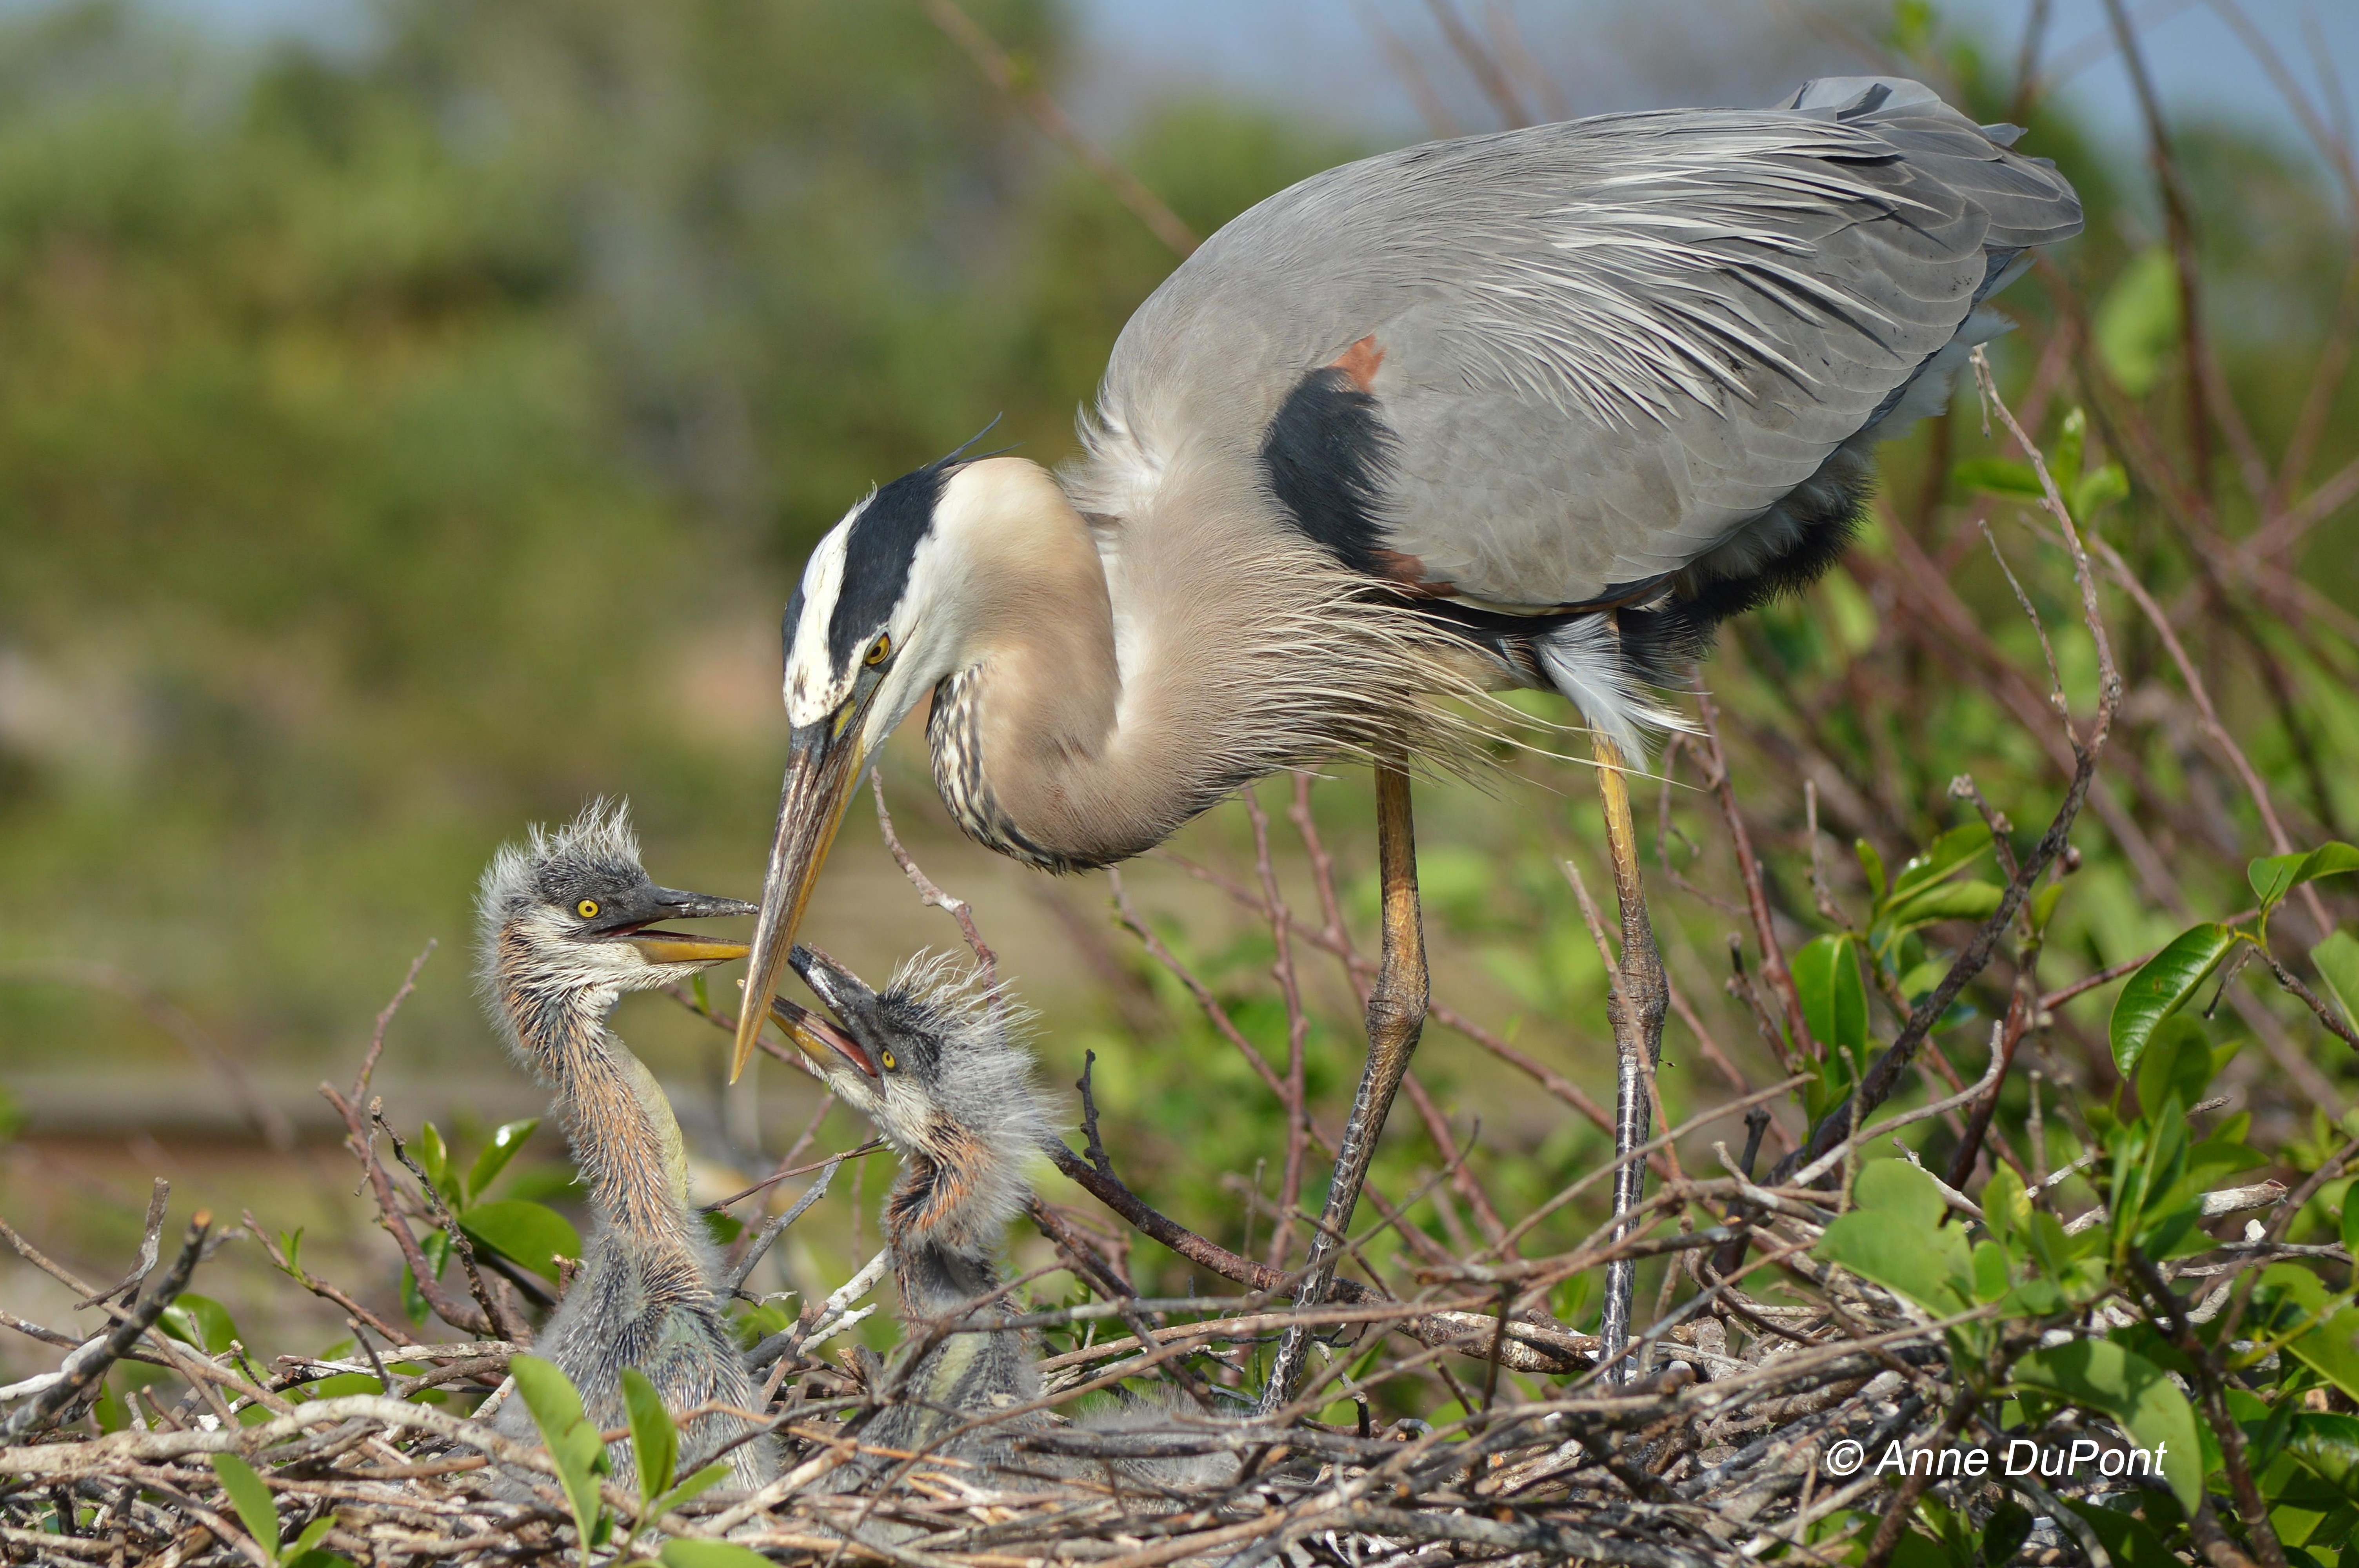 Great-Blue-Heron-and-chicks-c-2018-Anne-DuPont-all-rightsd-reserved.-Wakodahatchee-Wetlands.jpg